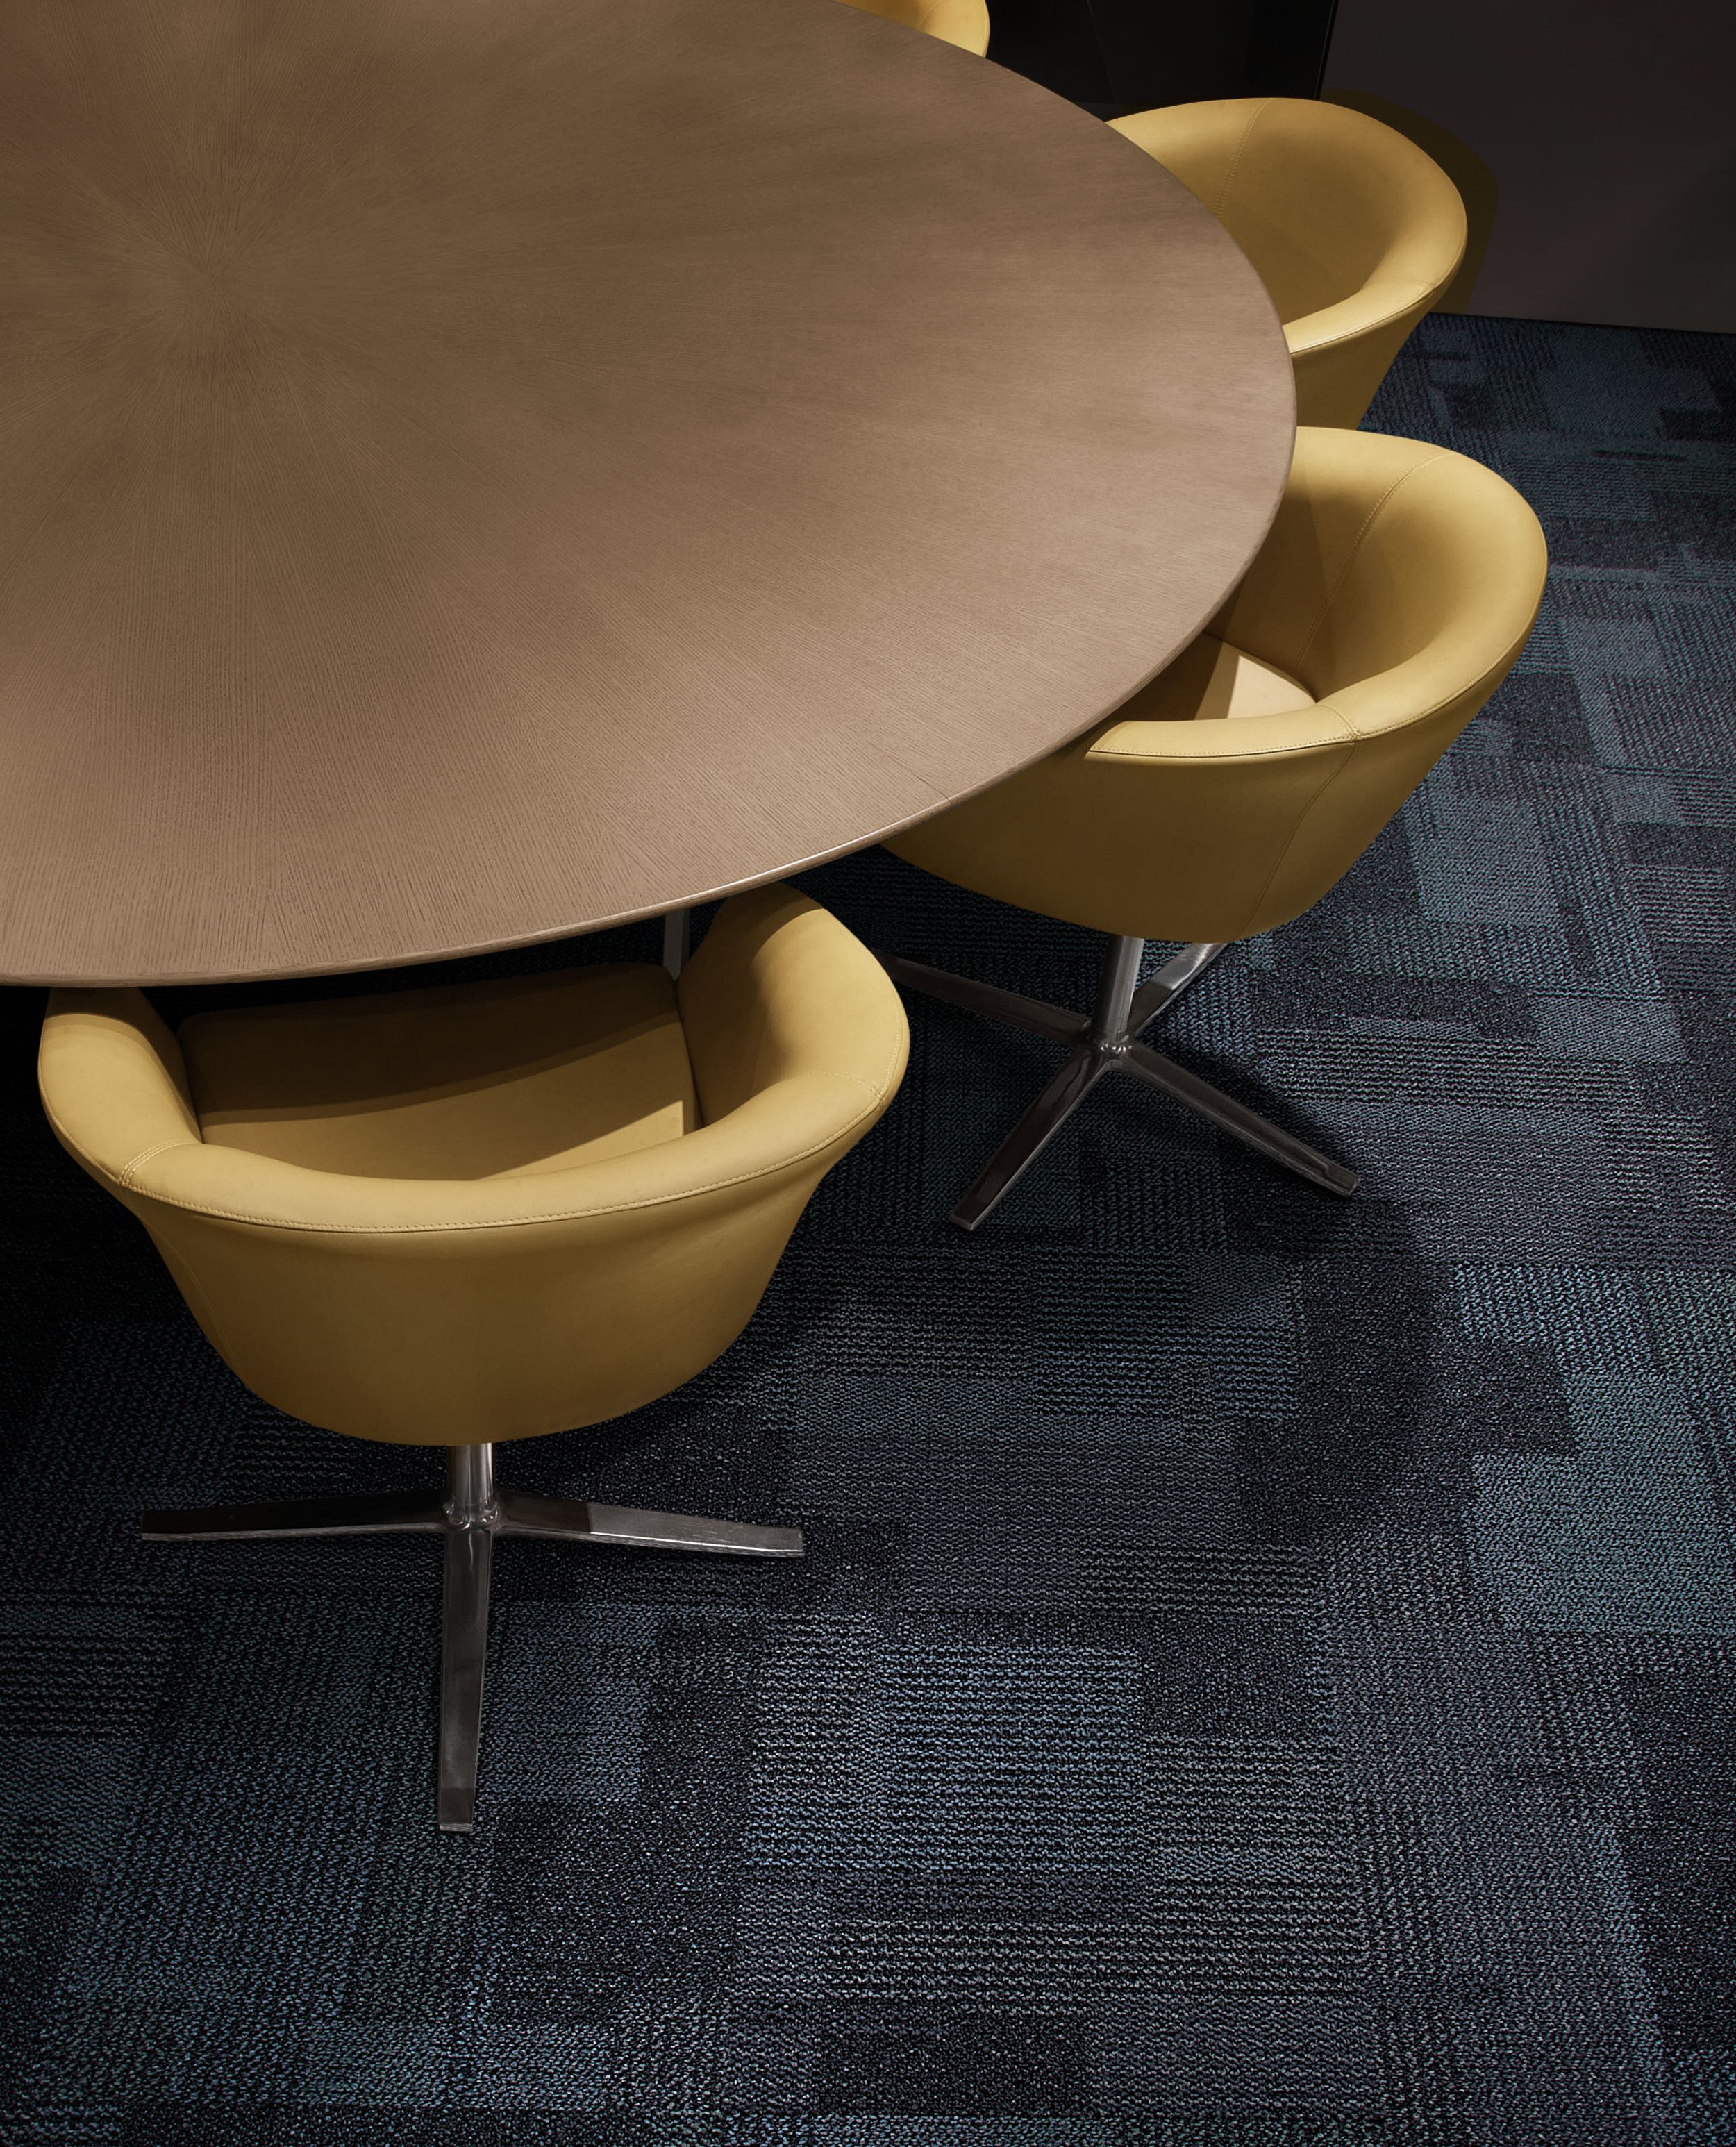 Interface Entropy carpet tile in meeting room with round wooden table and yellow chairs imagen número 3